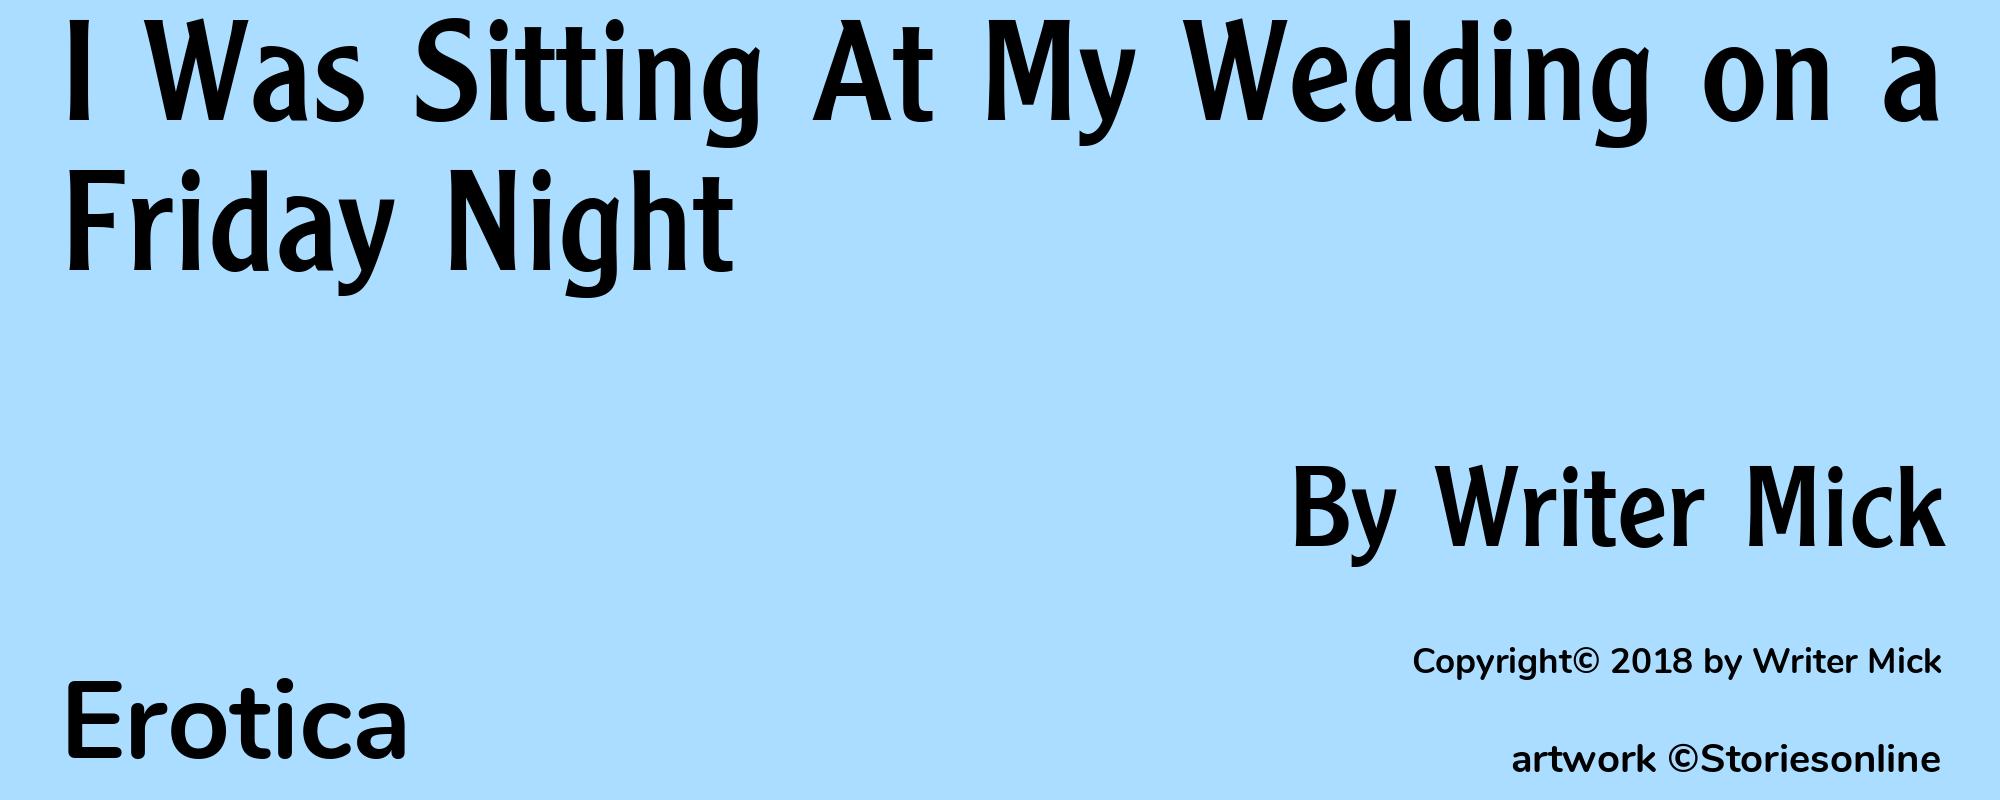 I Was Sitting At My Wedding on a Friday Night - Cover